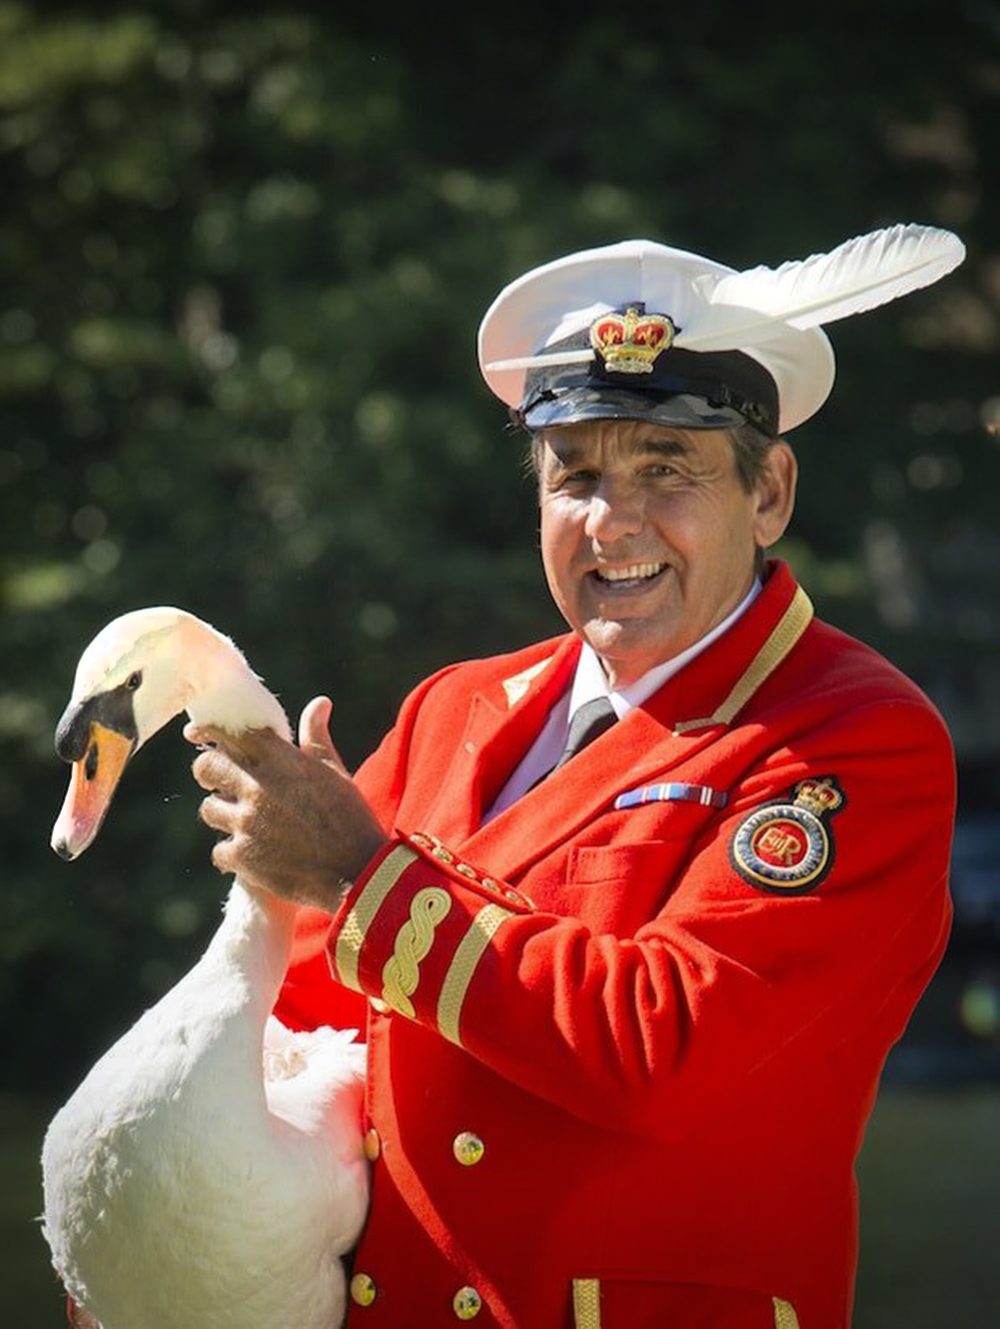 A photograph featuring a smiling man in a red coat and a hat holding a swan.